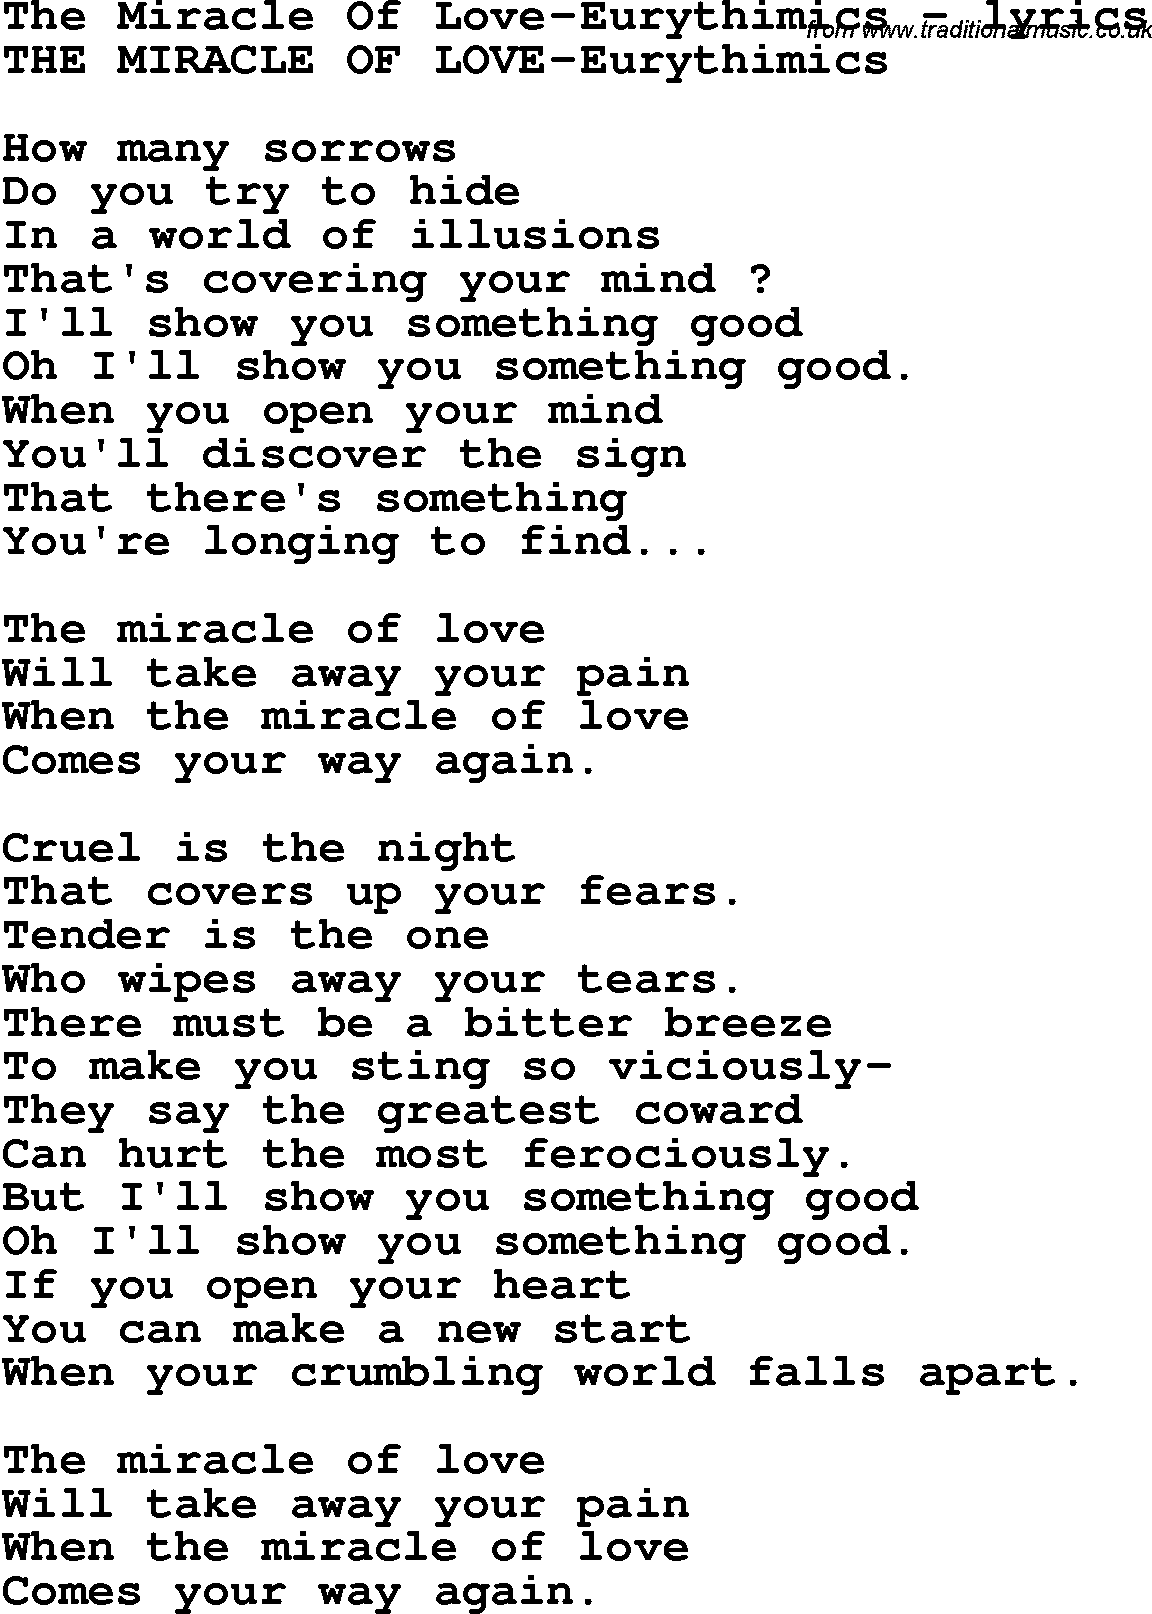 Love Song Lyrics for: The Miracle Of Love-Eurythimics